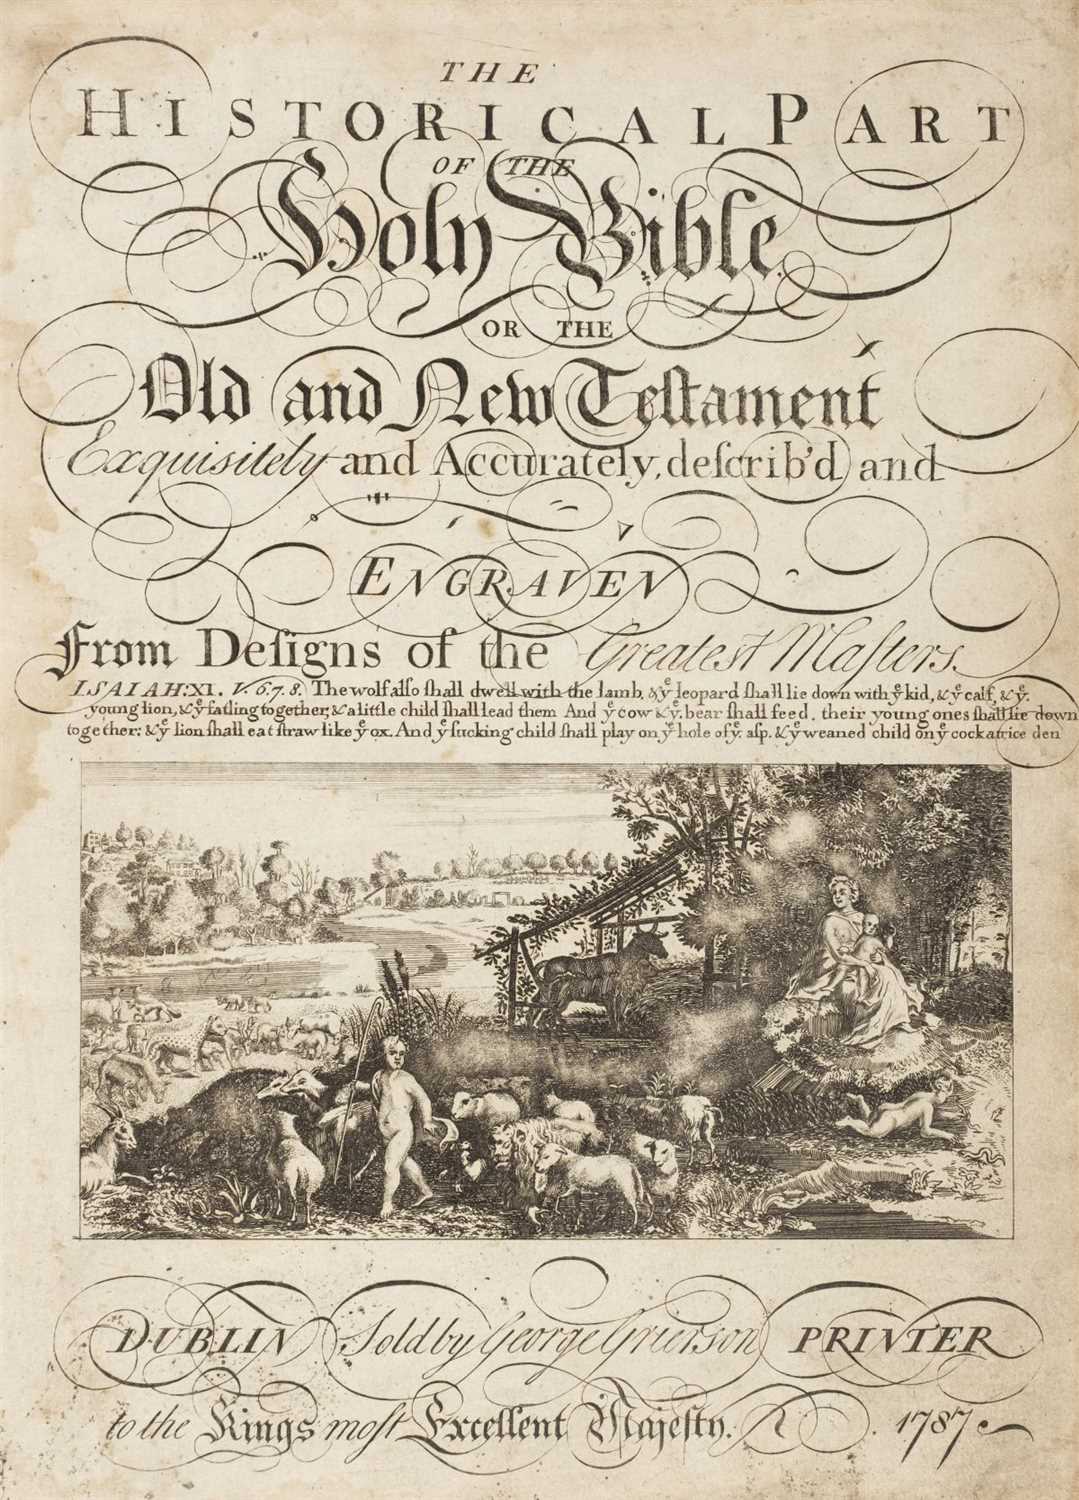 Lot 264 - Bible [English]. The Holy Bible, containing the Old and New Testaments, Dublin, 1782